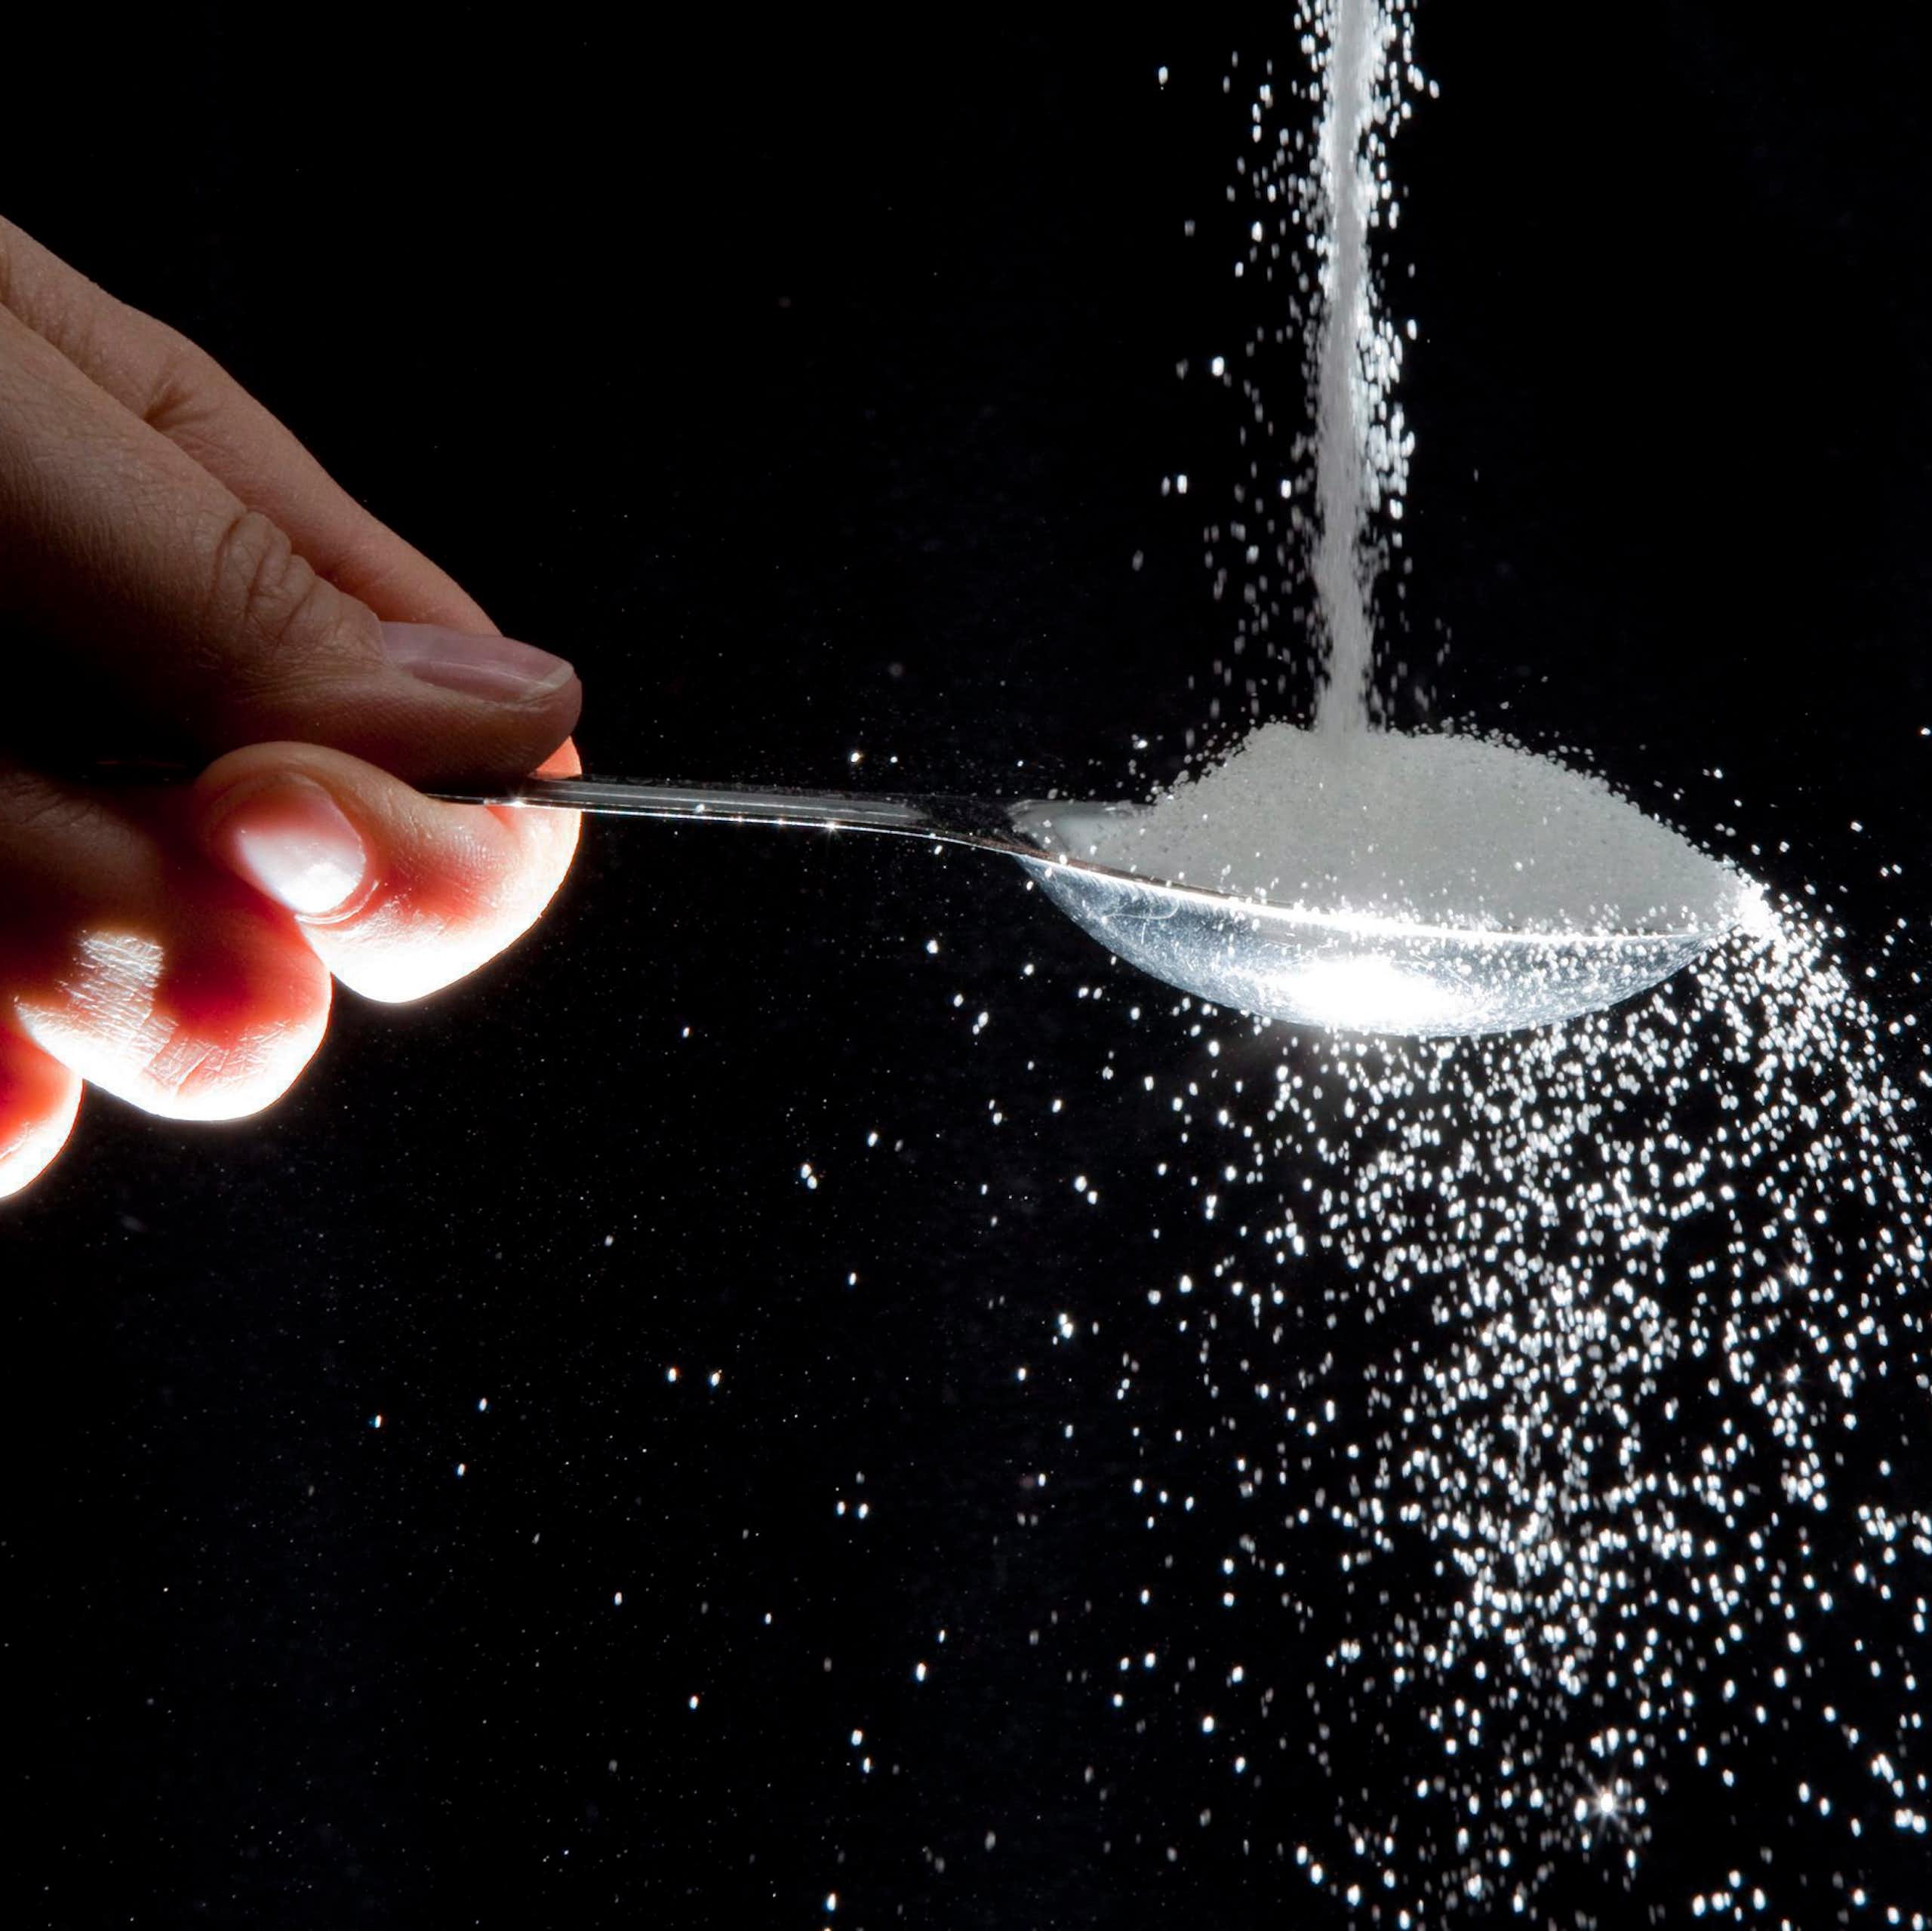 A hand holds a spoon as sugar pours onto it